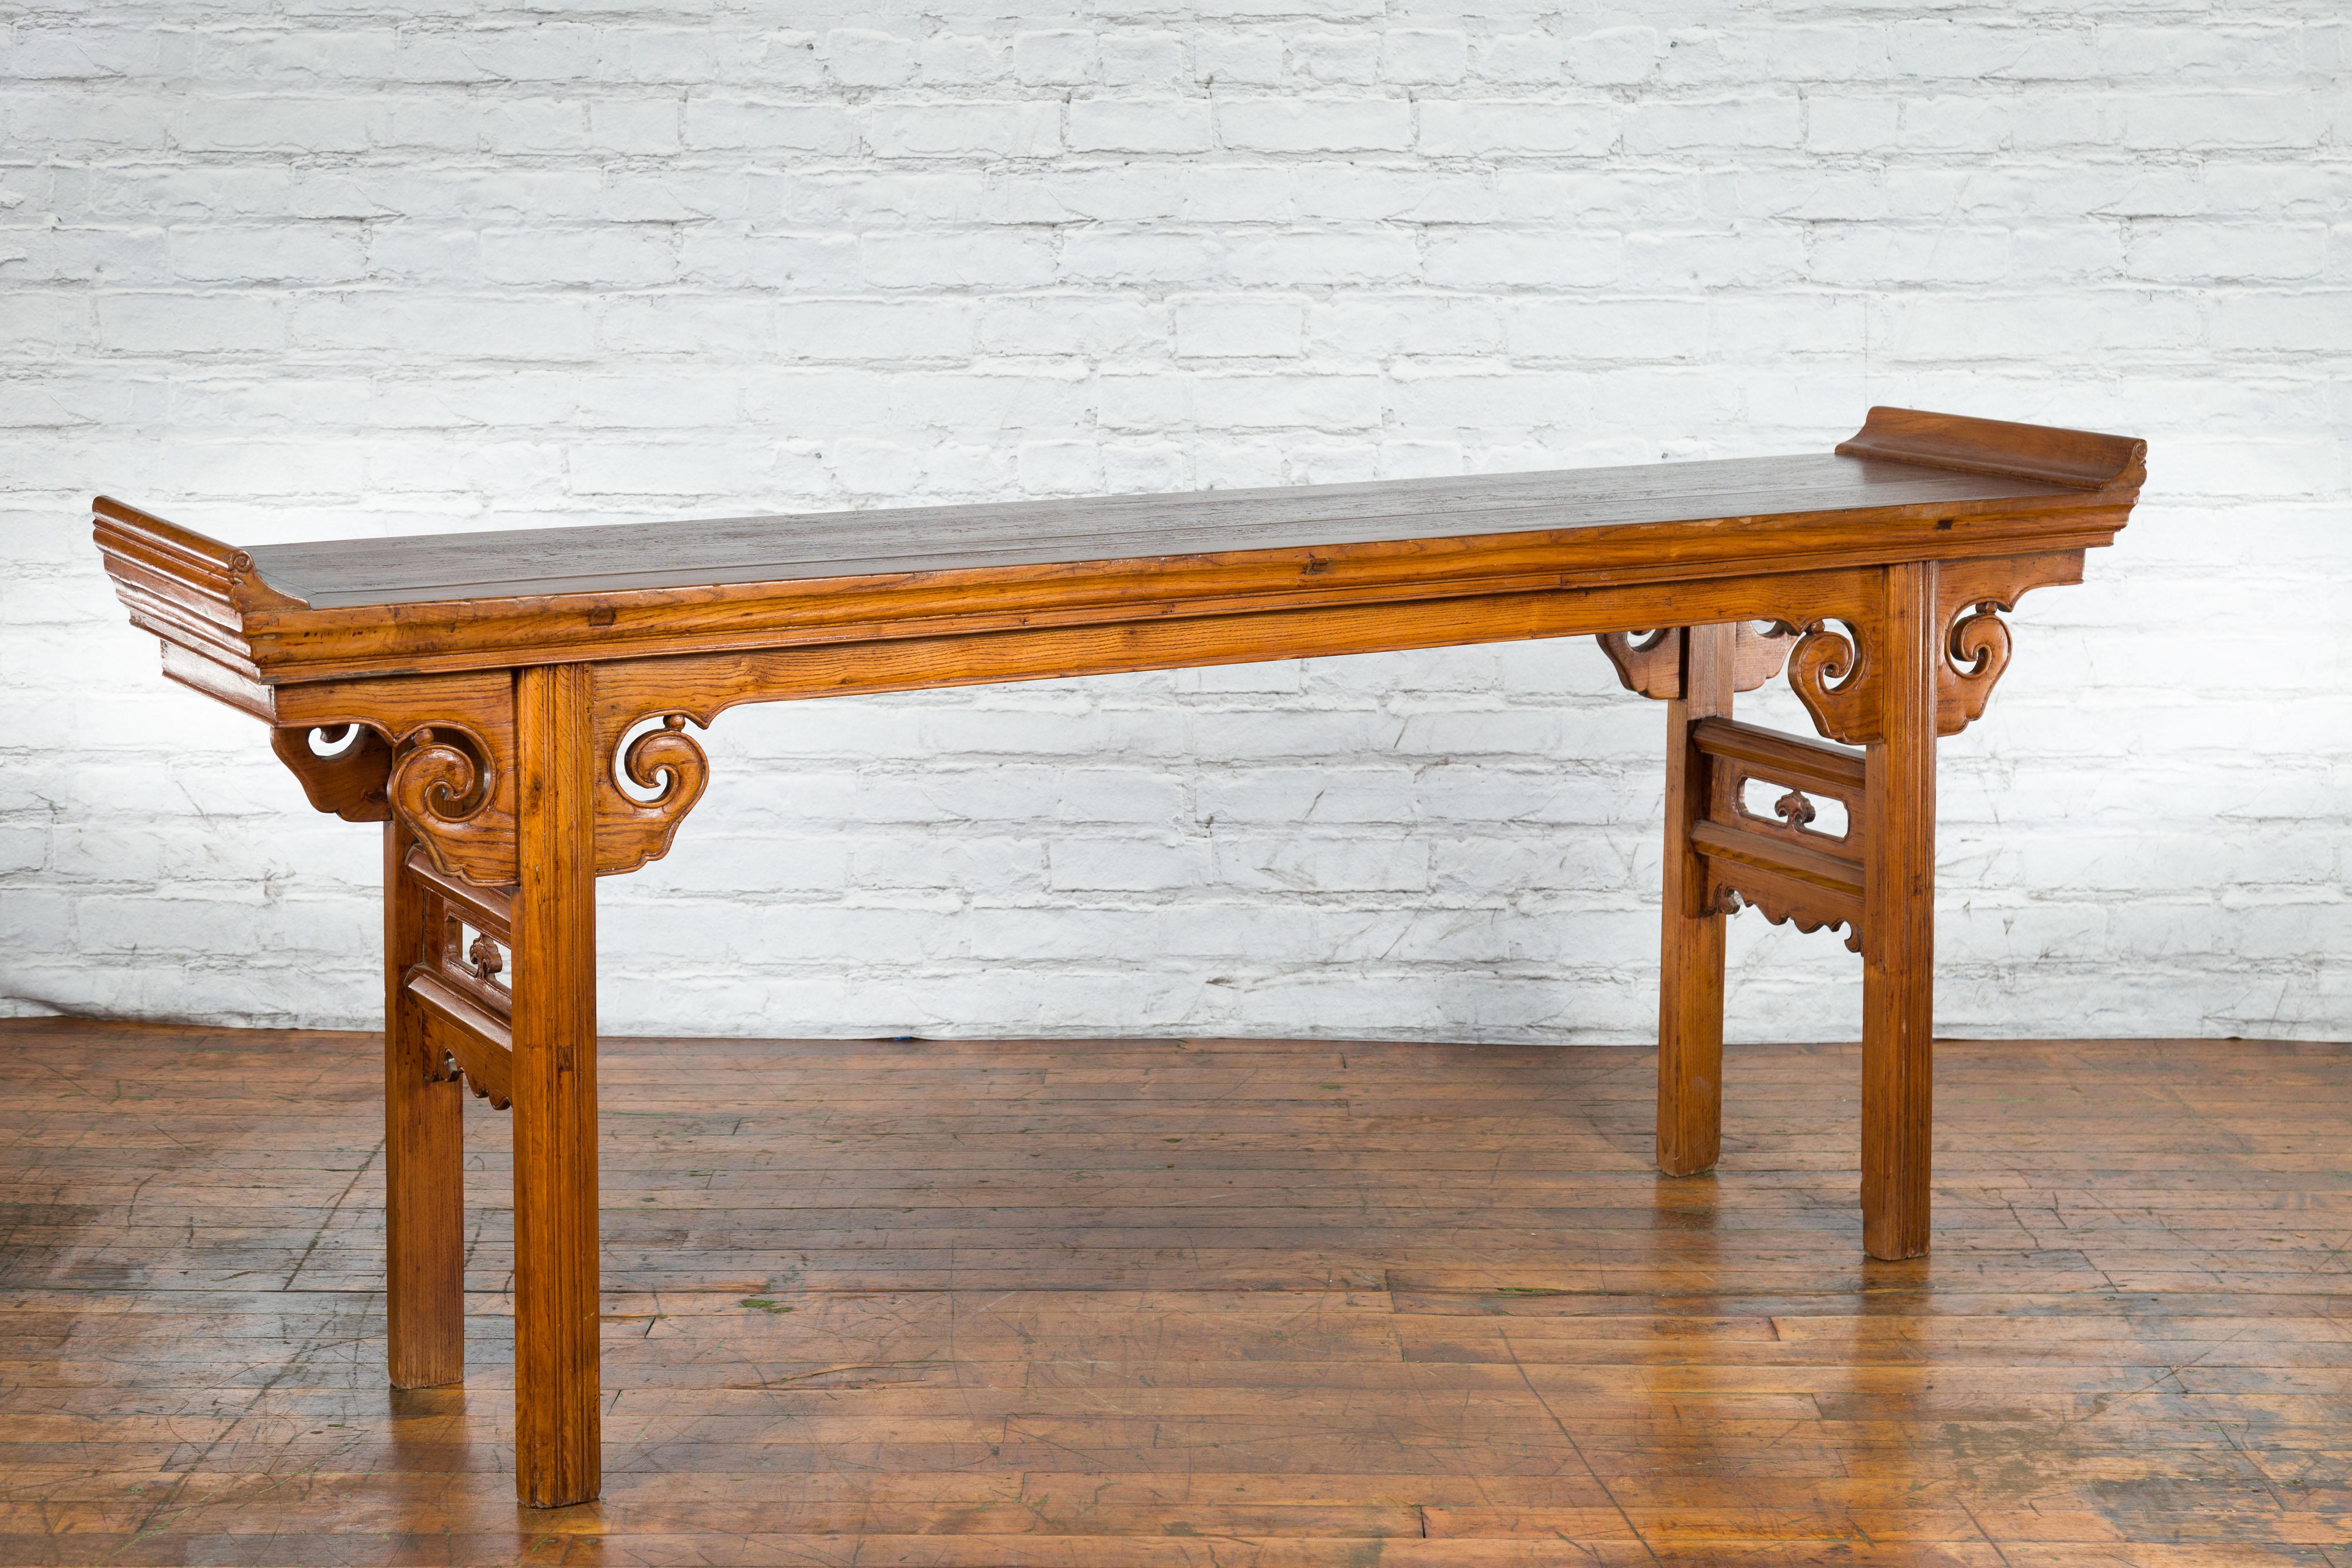 A Chinese Qing Dynasty period wooden altar console table from the 19th century with everted flanges, scrolling spandrels and carved side panels. Created in China during the 19th century, this altar table attracts our attention with its brown patina